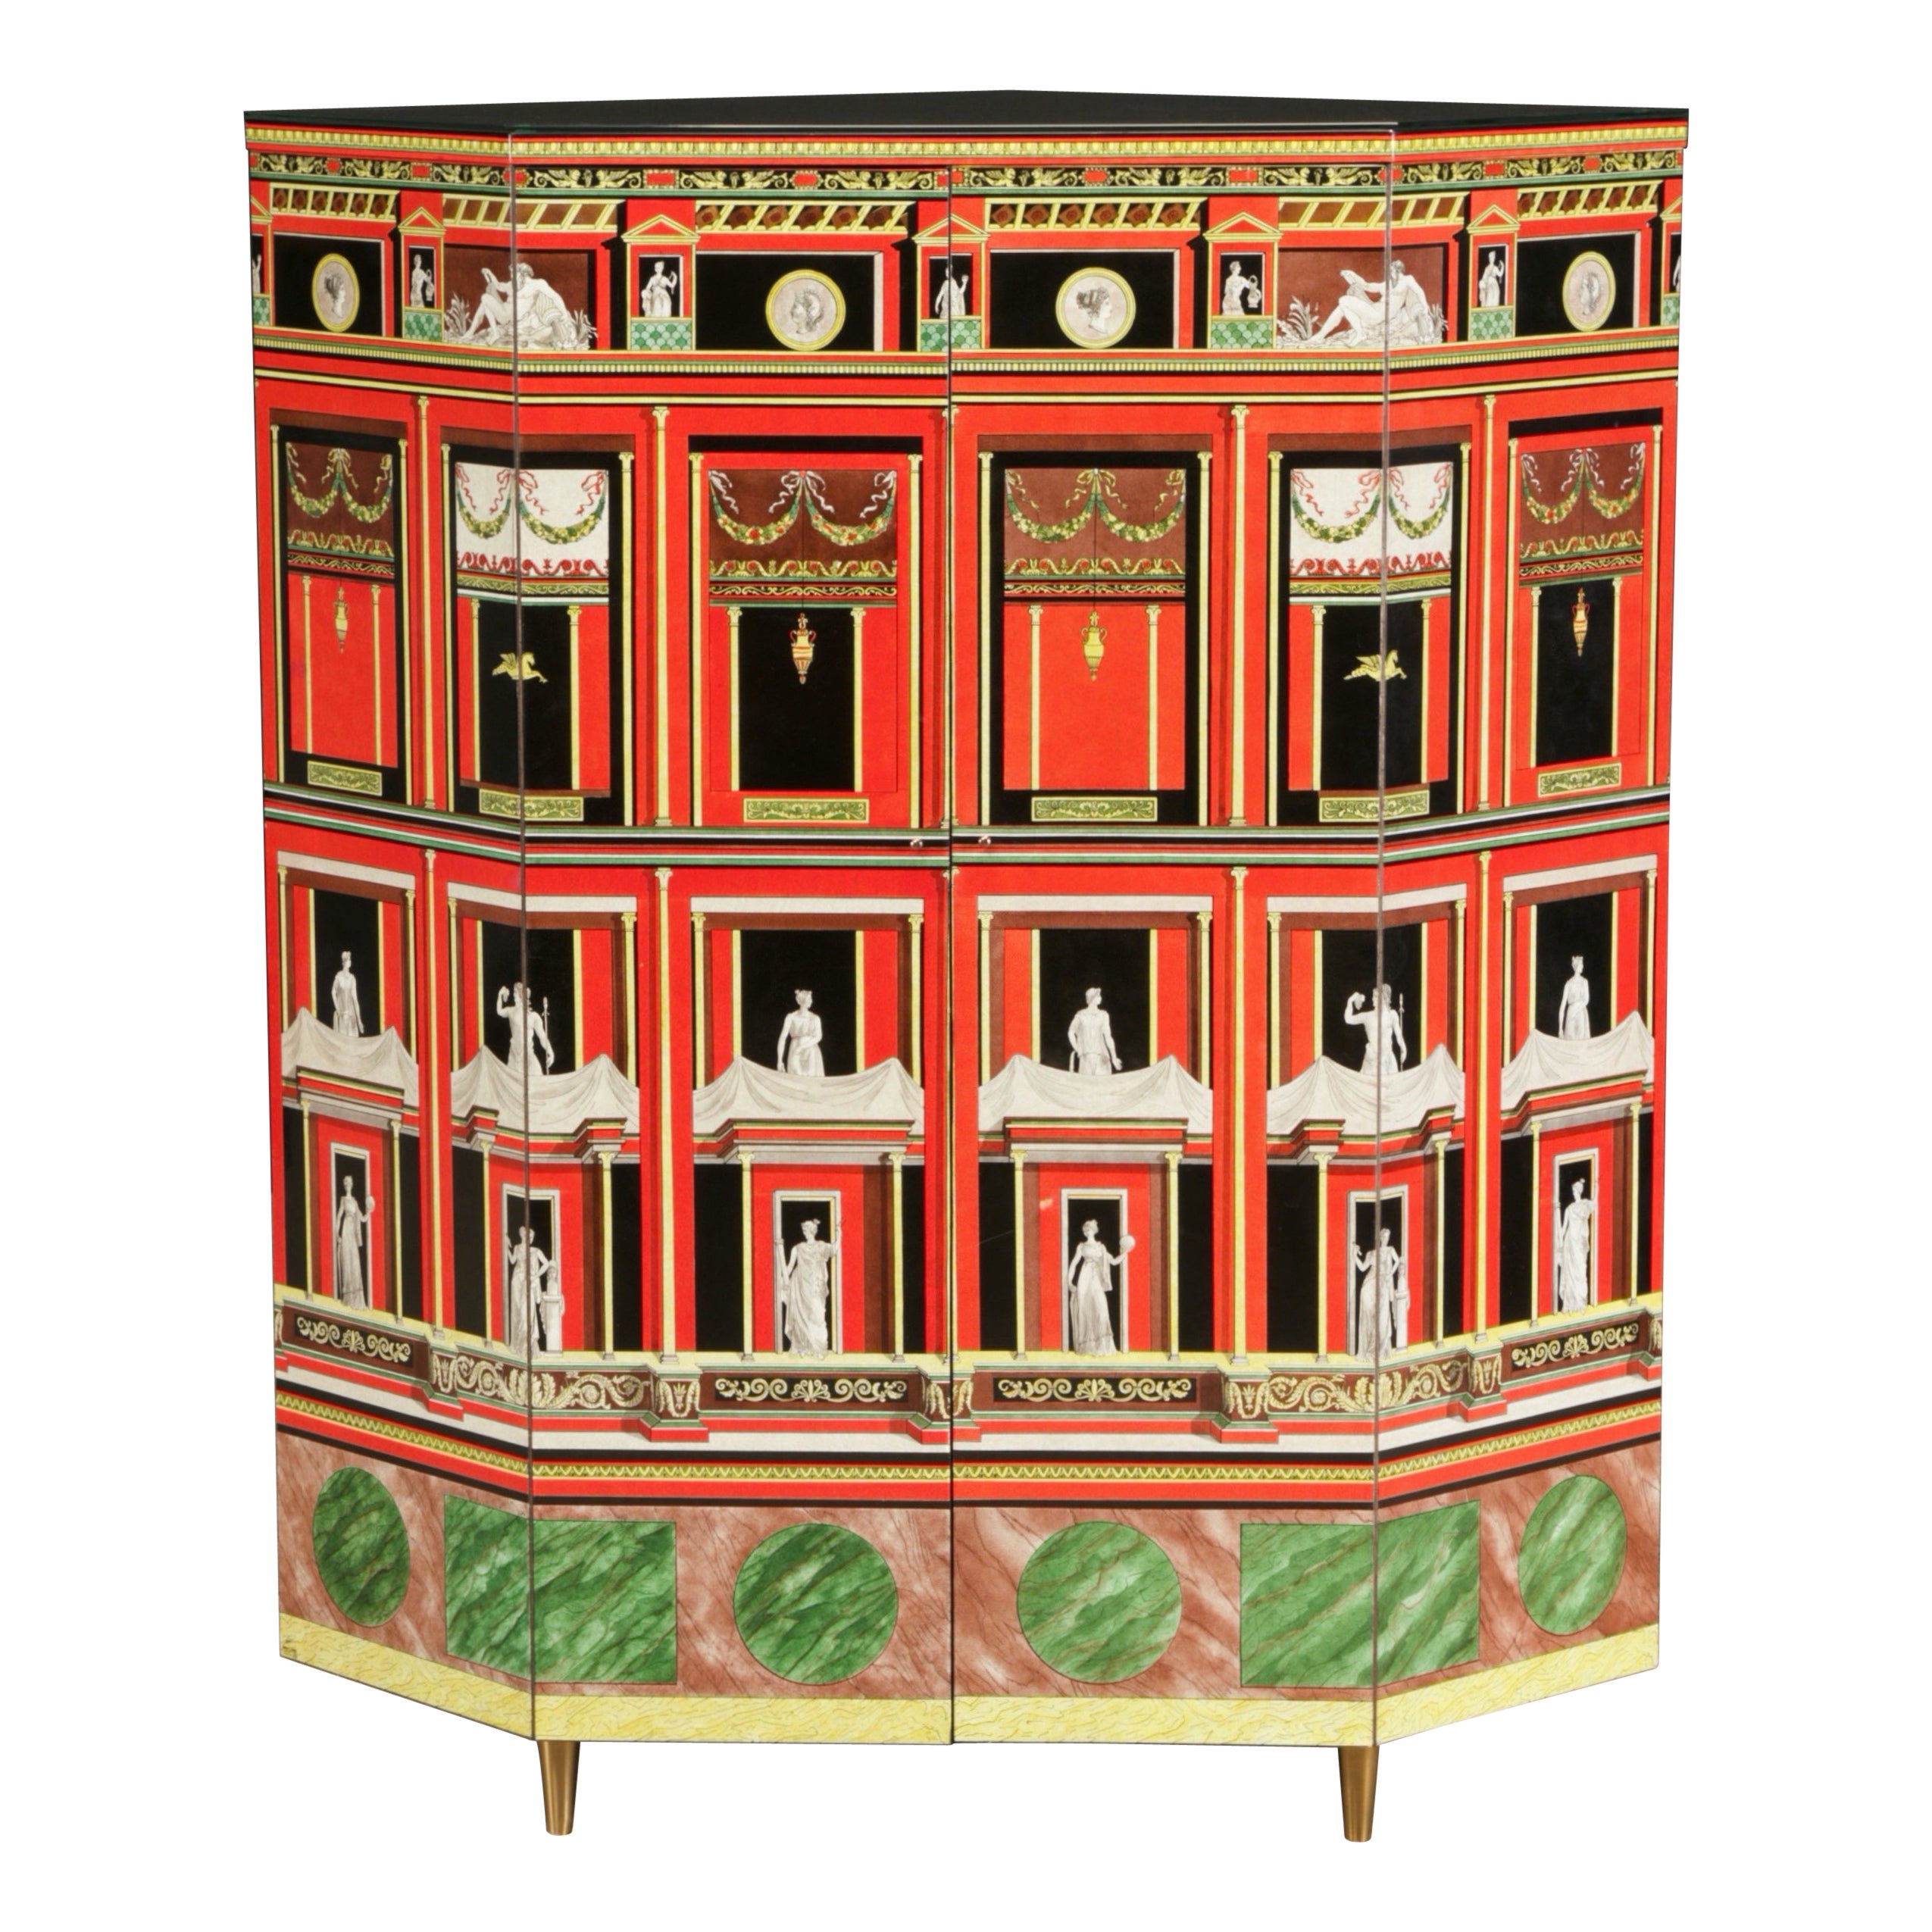 'Pompeiana' Corner Cabinet by Piero Fornasetti, Italy, 2 of 2 in 1988, Signed 